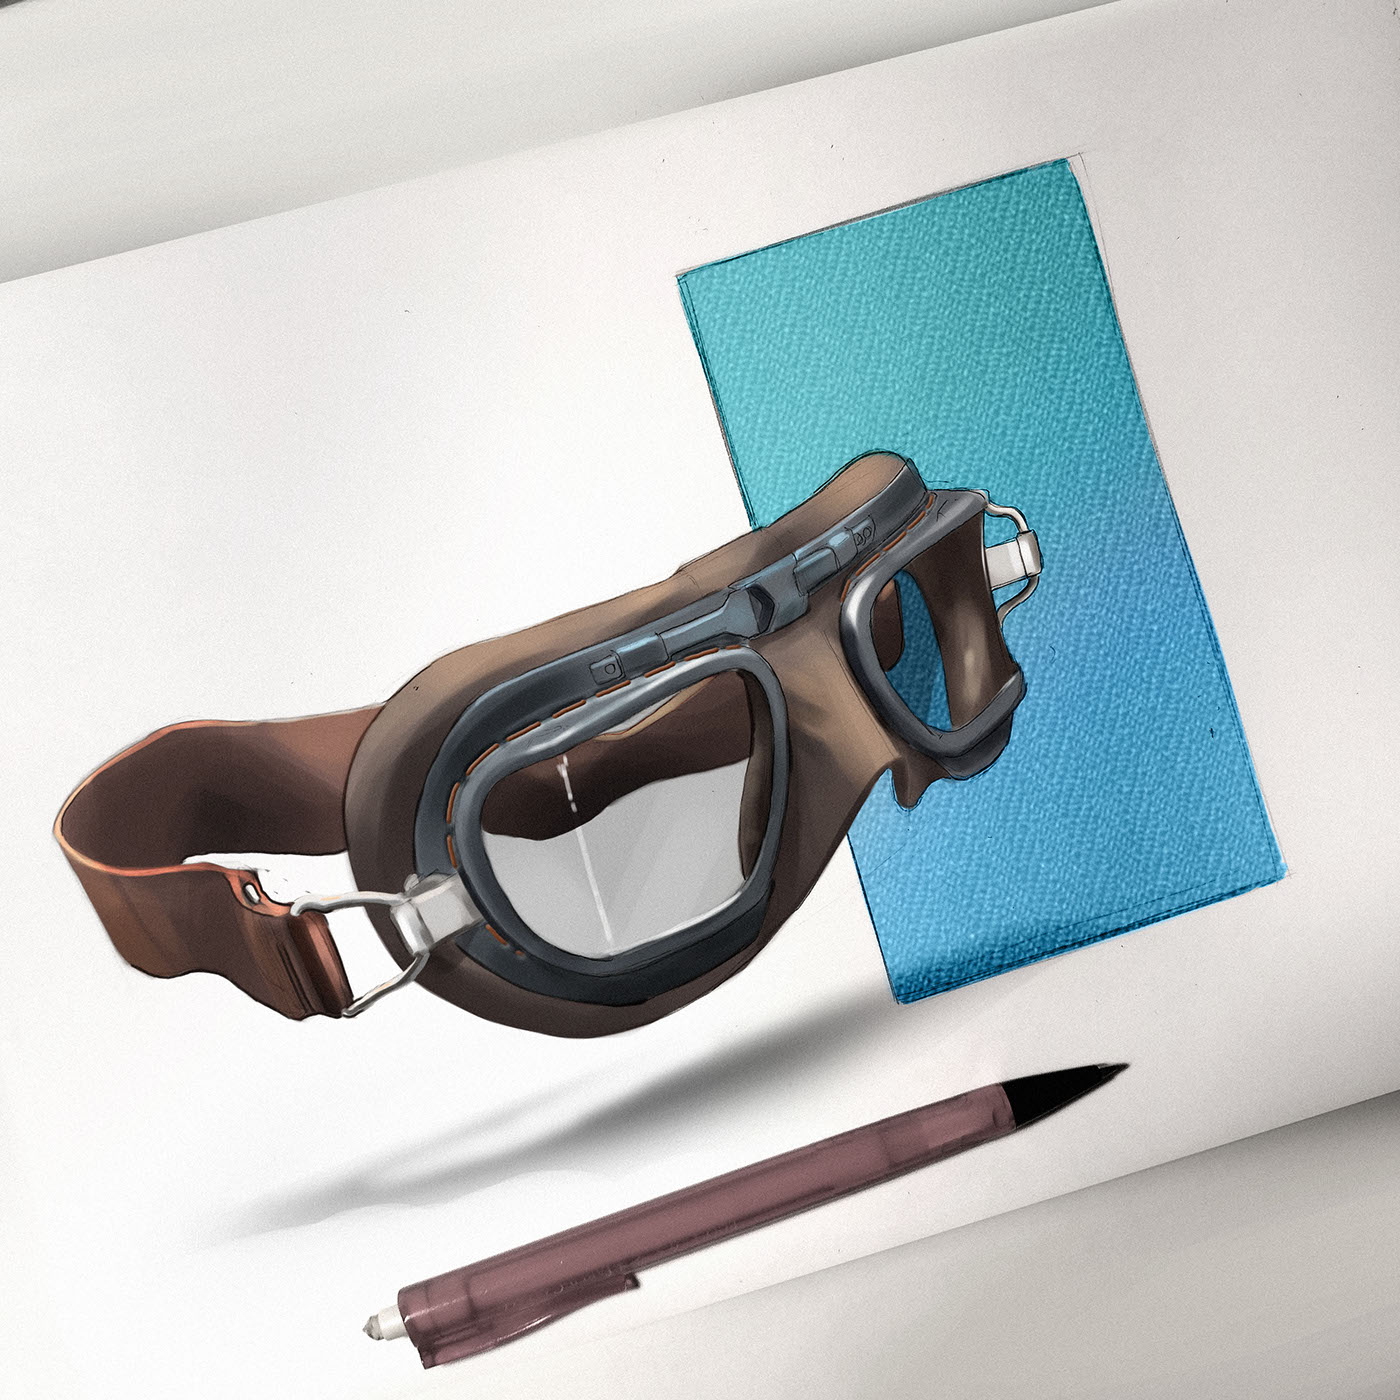 sketch product sketches Industrial Design sketches product illustration ILLUSTRATION  Photoshop renders product design 